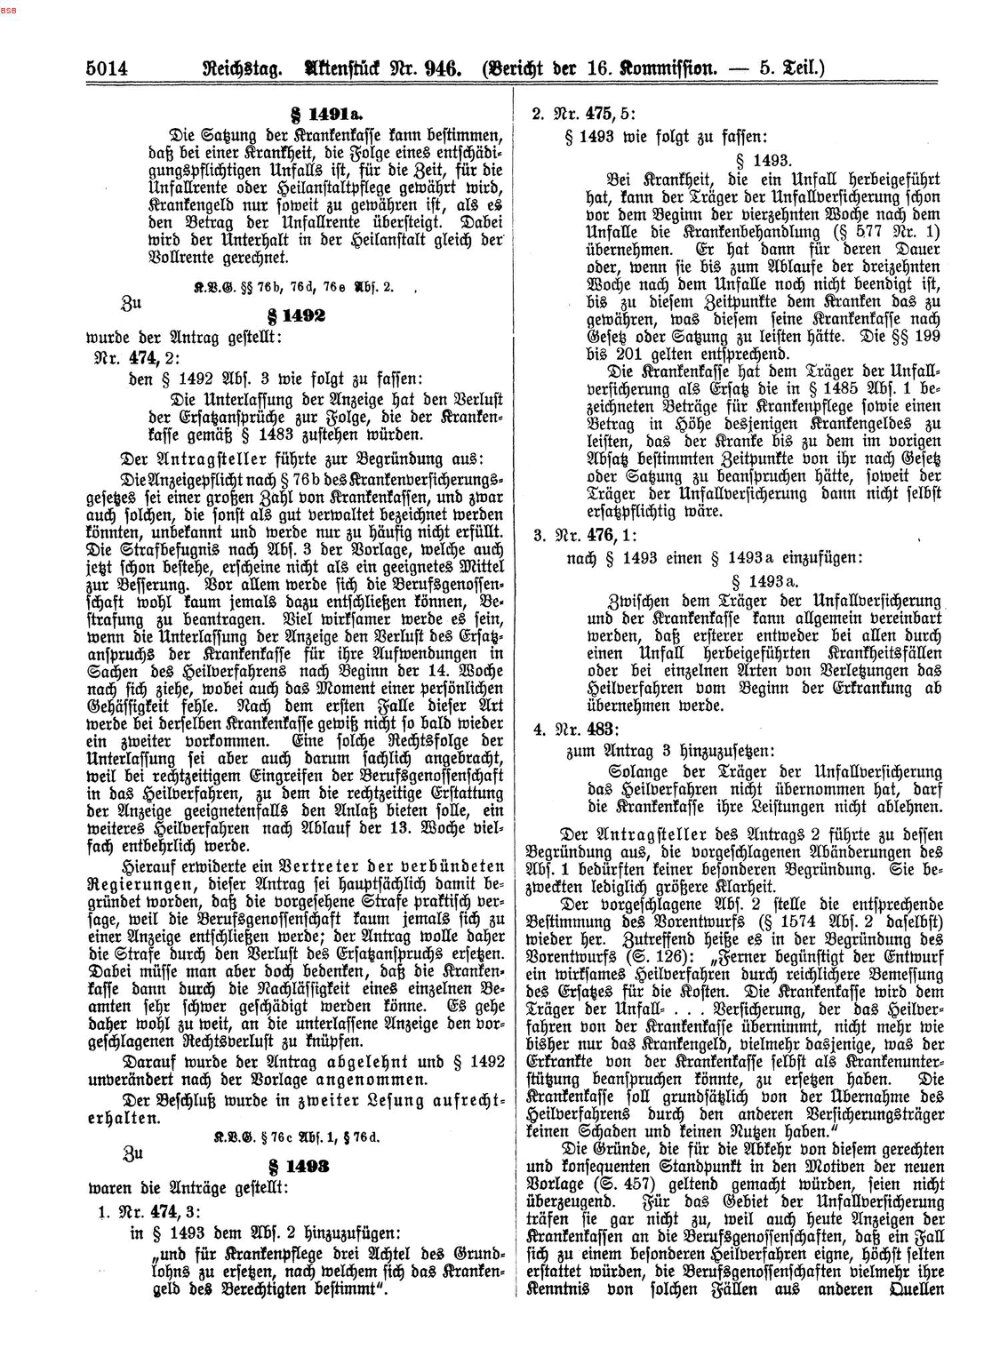 Scan of page 5014